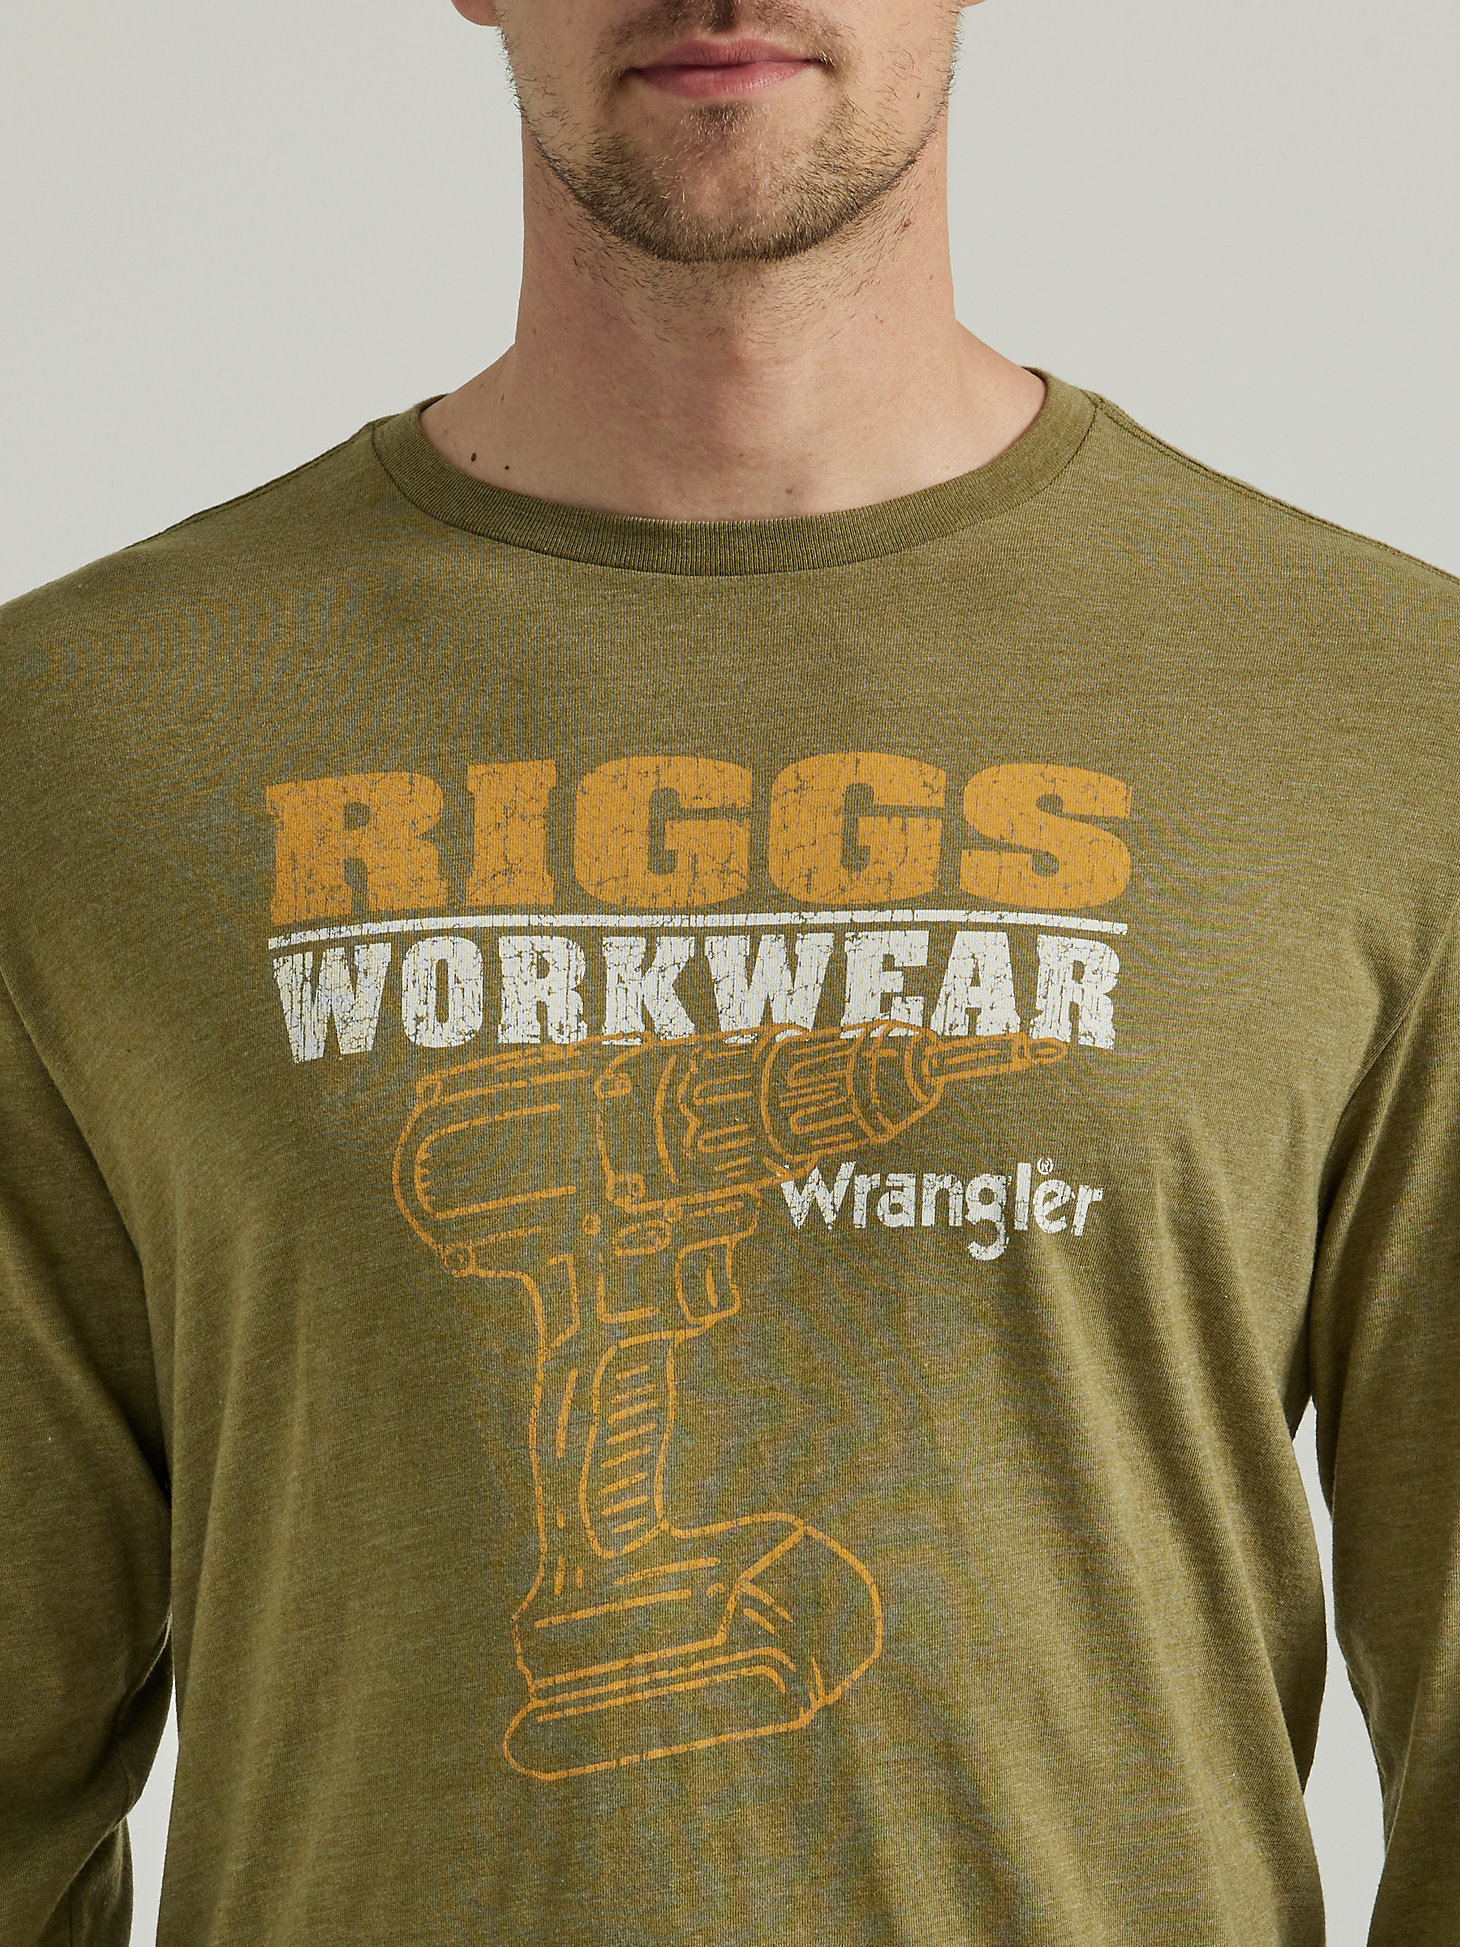 Wrangler® RIGGS Workwear® Relaxed Front Long Sleeve Graphic T-Shirt in Capulet Olive alternative view 3